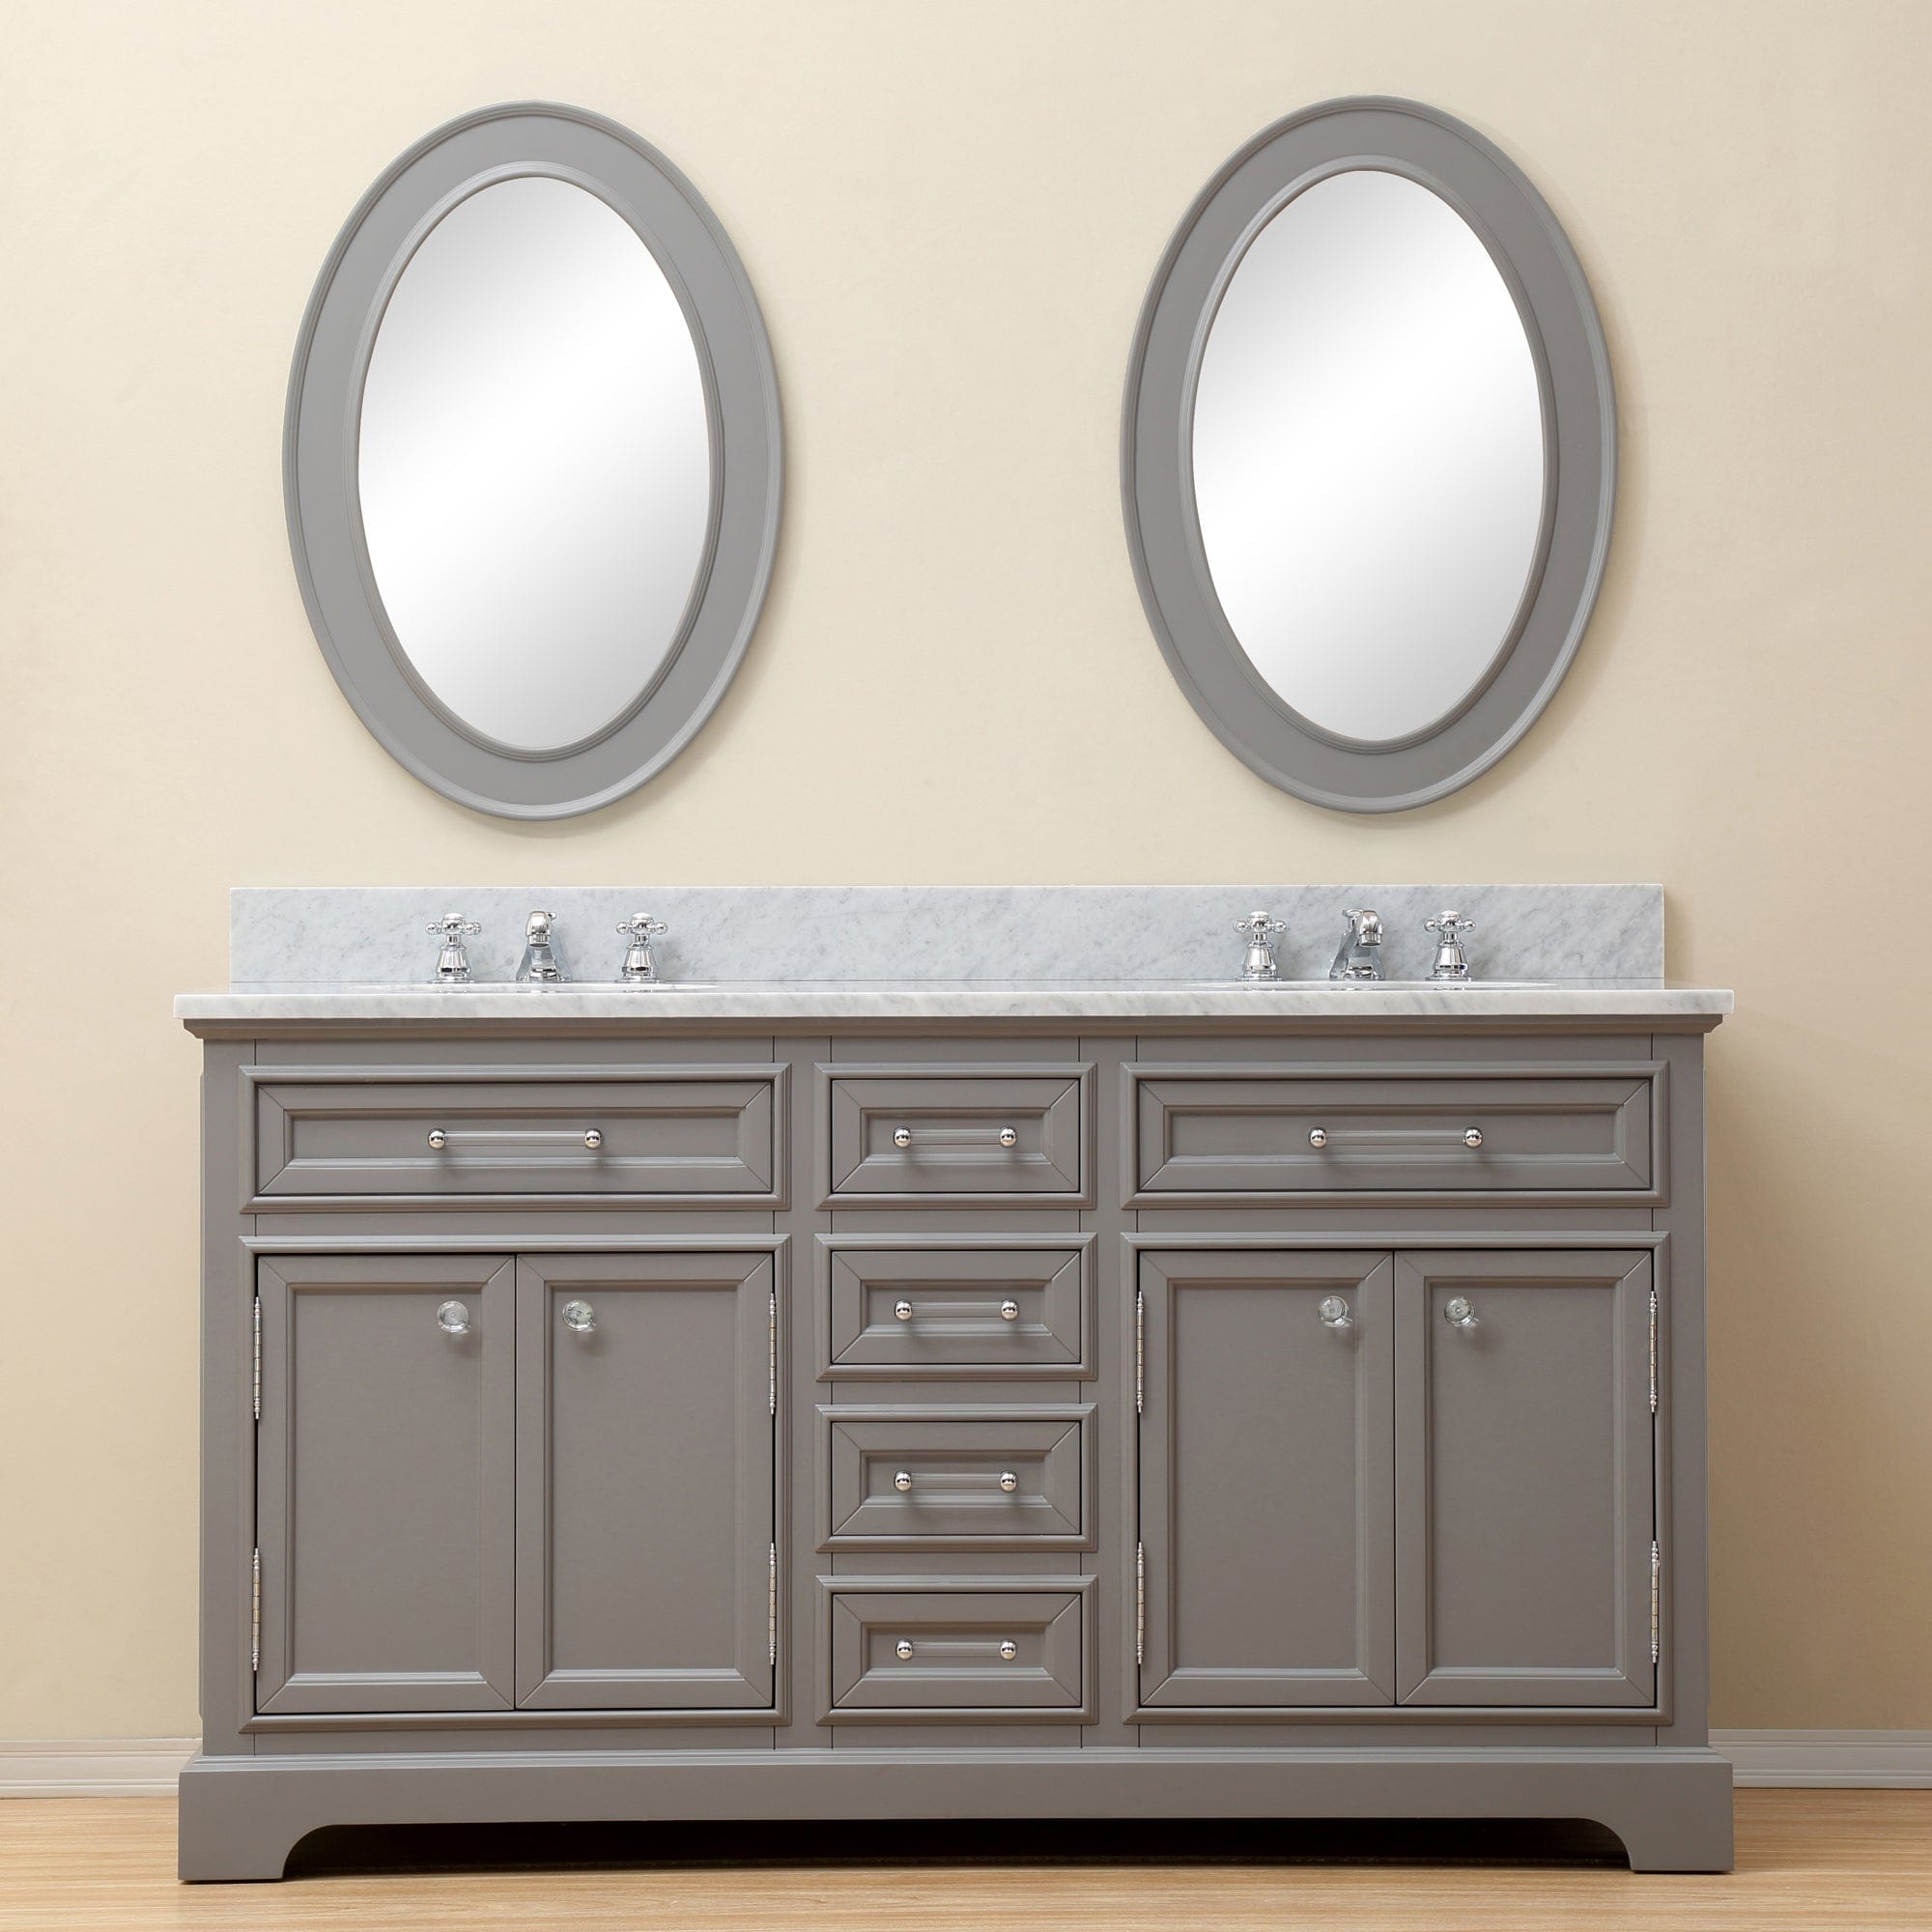 60 Inch Cashmere Grey Double Sink Bathroom Vanity With Faucet From The Derby Collection - Molaix700621683094Bathroom VanitiesDE60CW01CG-000BX0901